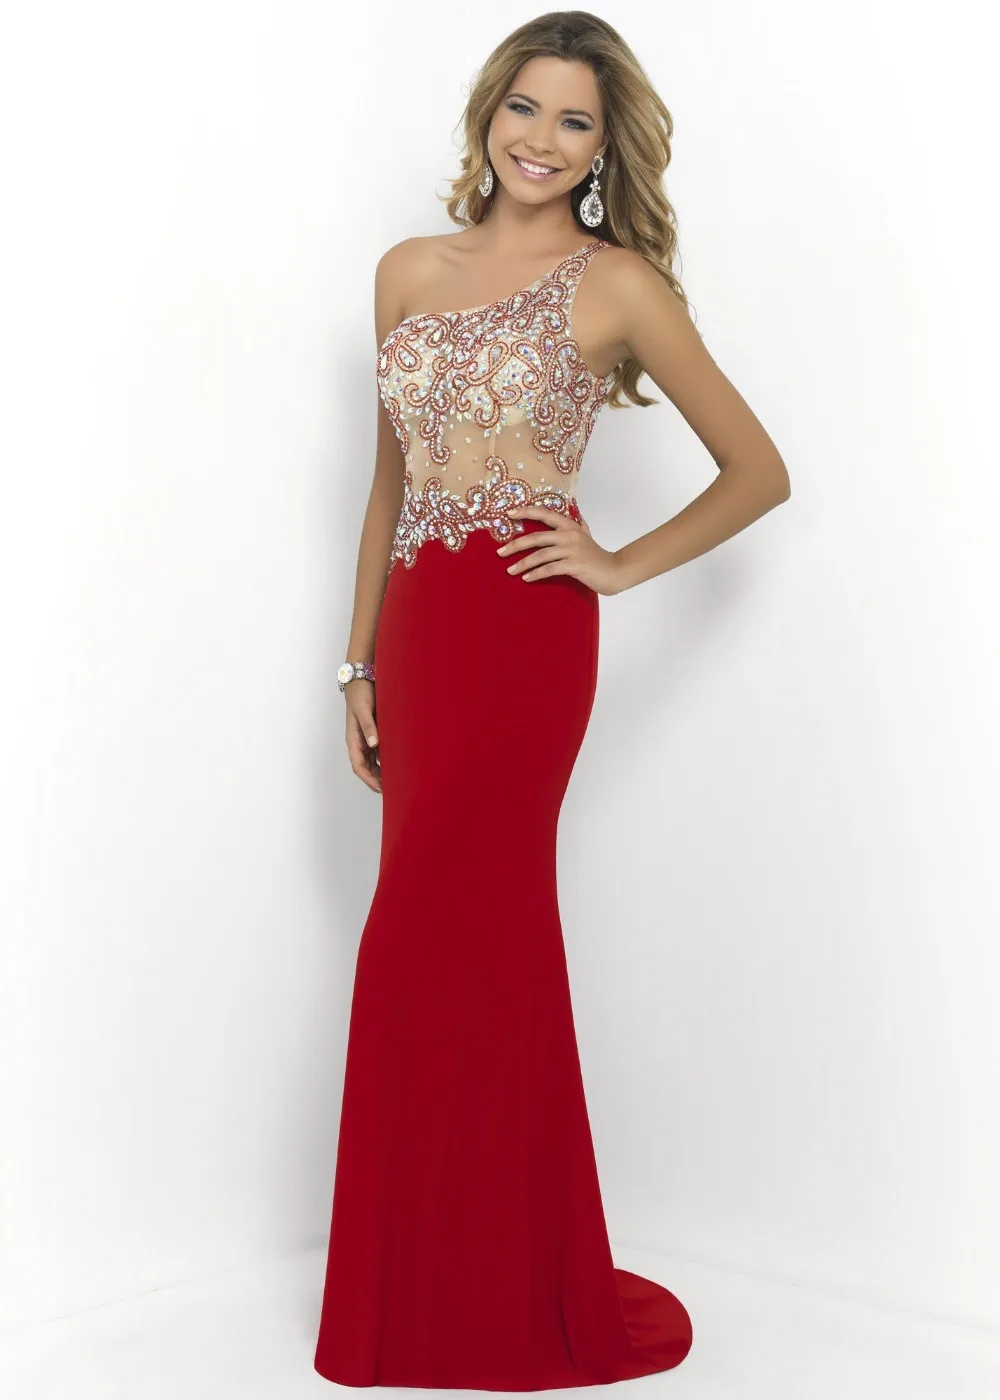 red and black prom dresses 2015 page 1 - prom dresses